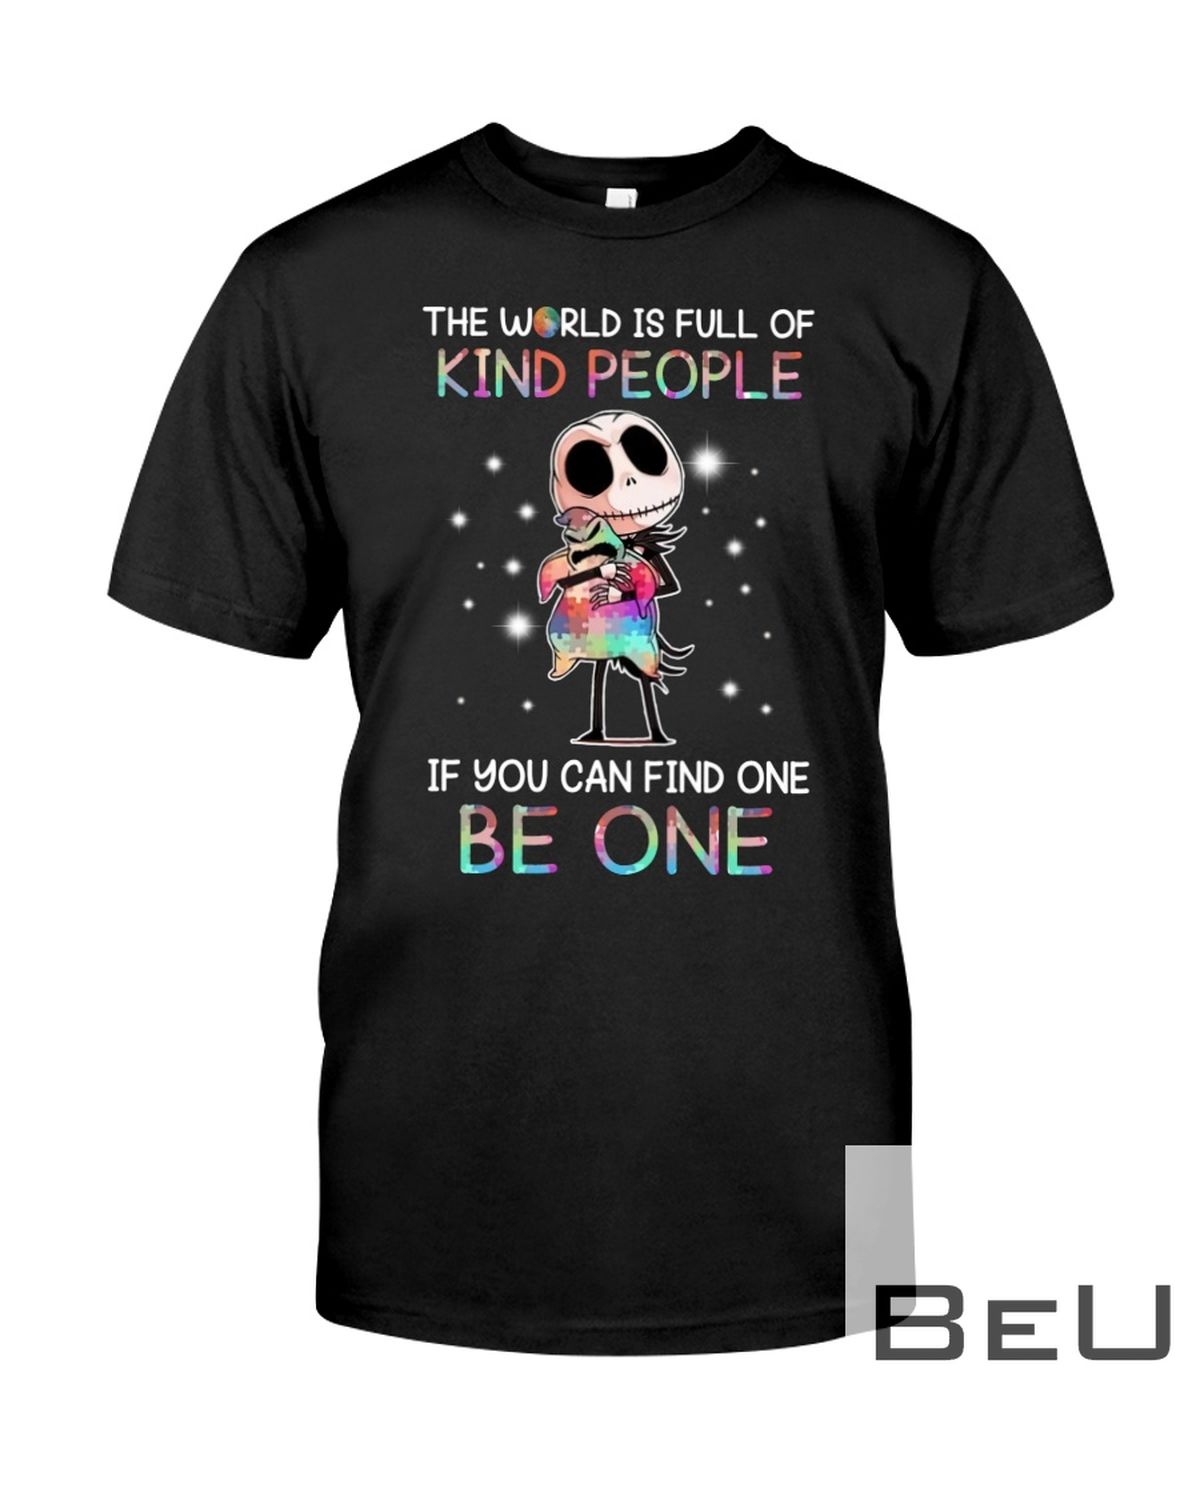 The World Is Full Of Kind People If You Can Find One Be One Shirt